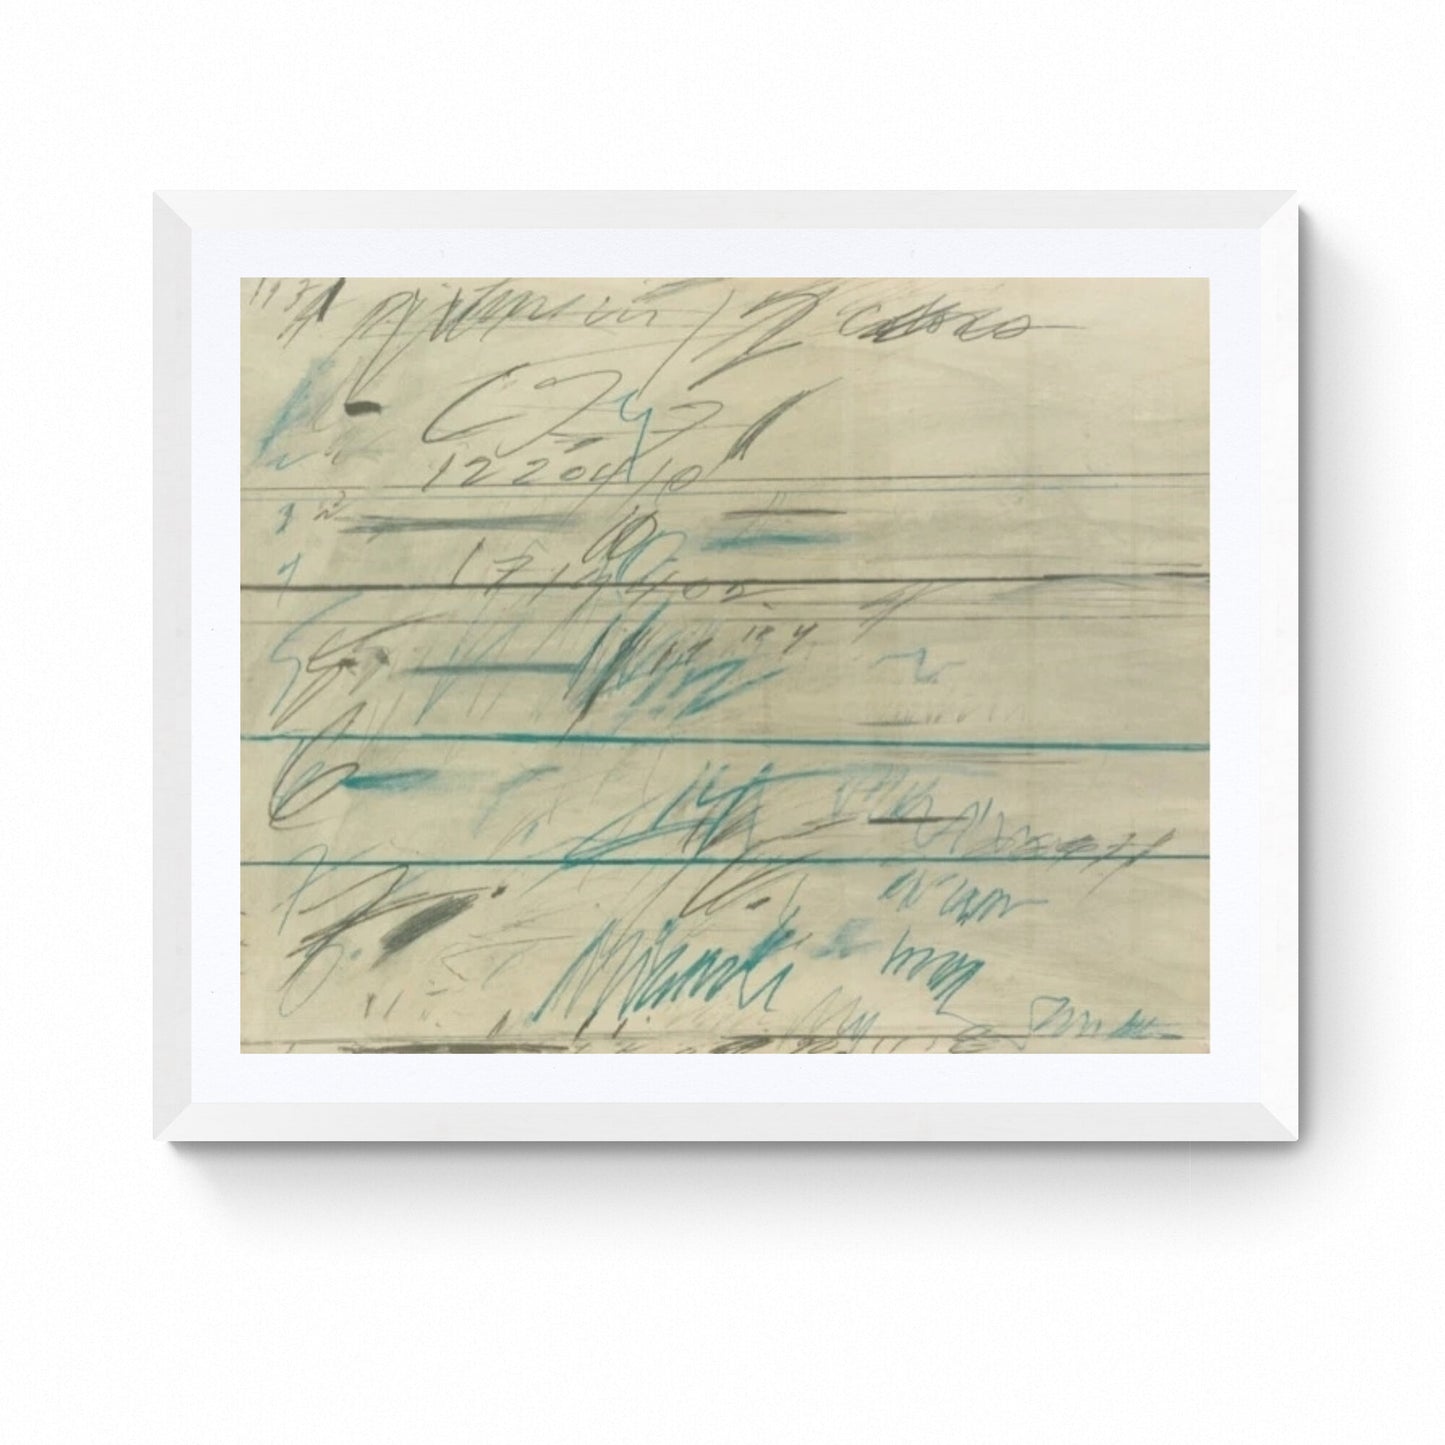 CY Twombly - Sin título